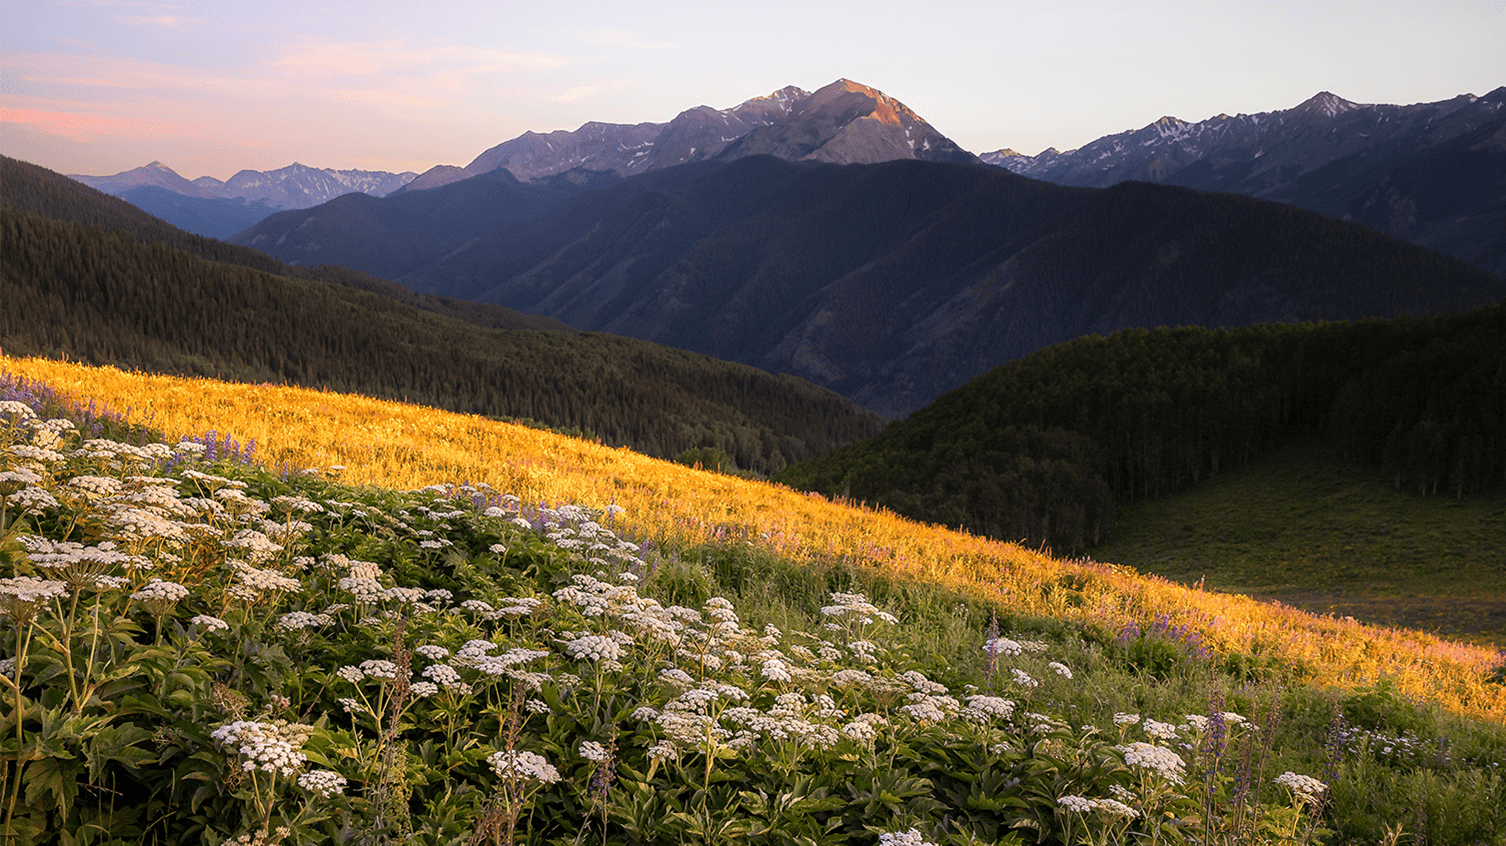 I field of yellow and white flowers at dusk, the sunset in illuminating the mountains to glow purple 